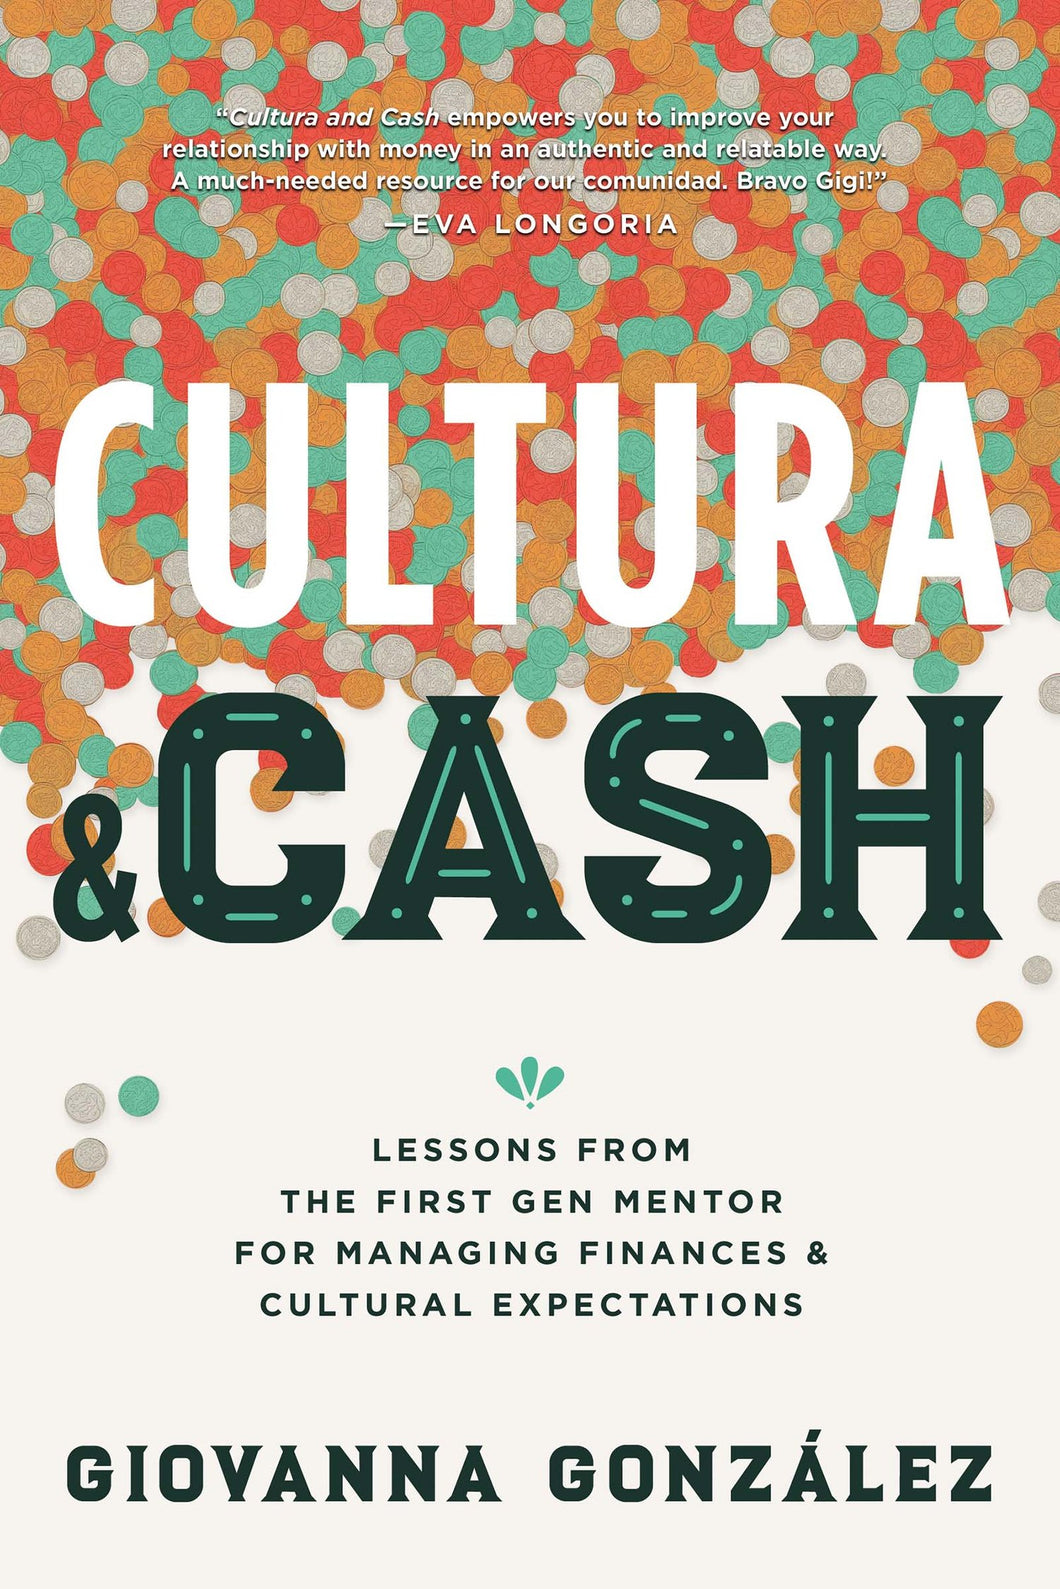 Cultura and Cash: Lessons from the First Gen Mentor for Managing Finances and Cultural Expectations